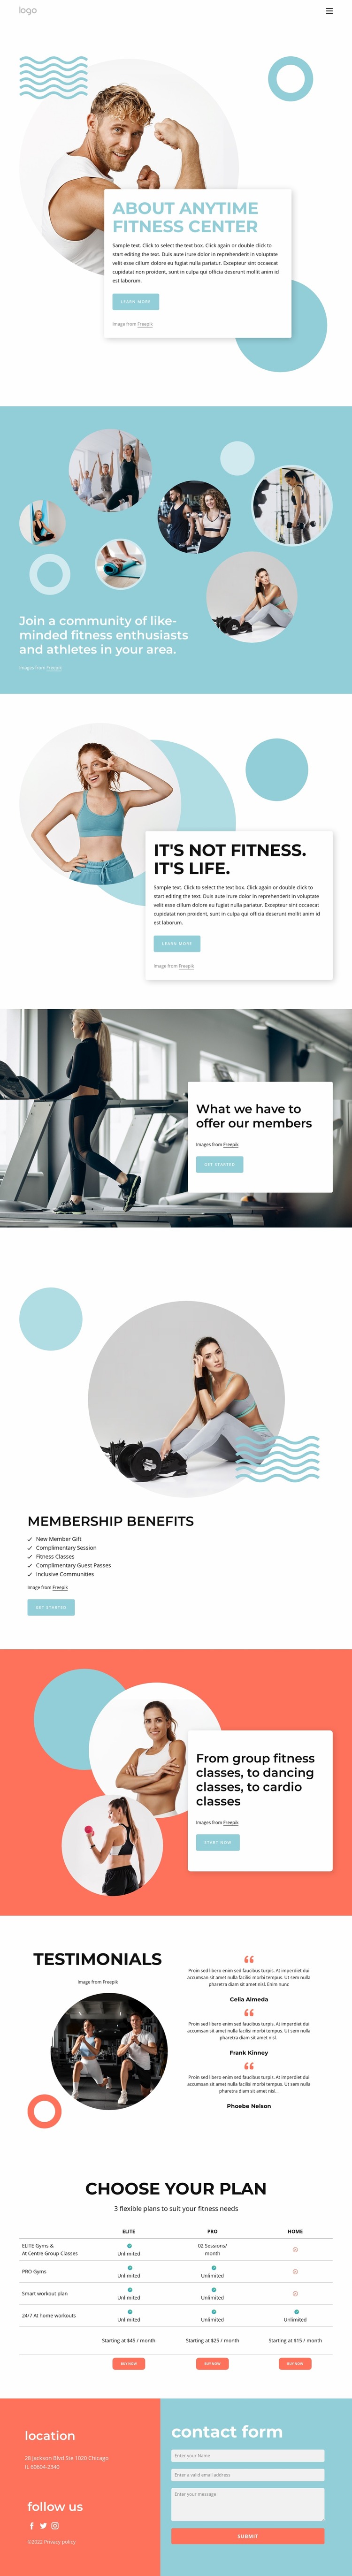 About Anytime fitness center Html Website Builder